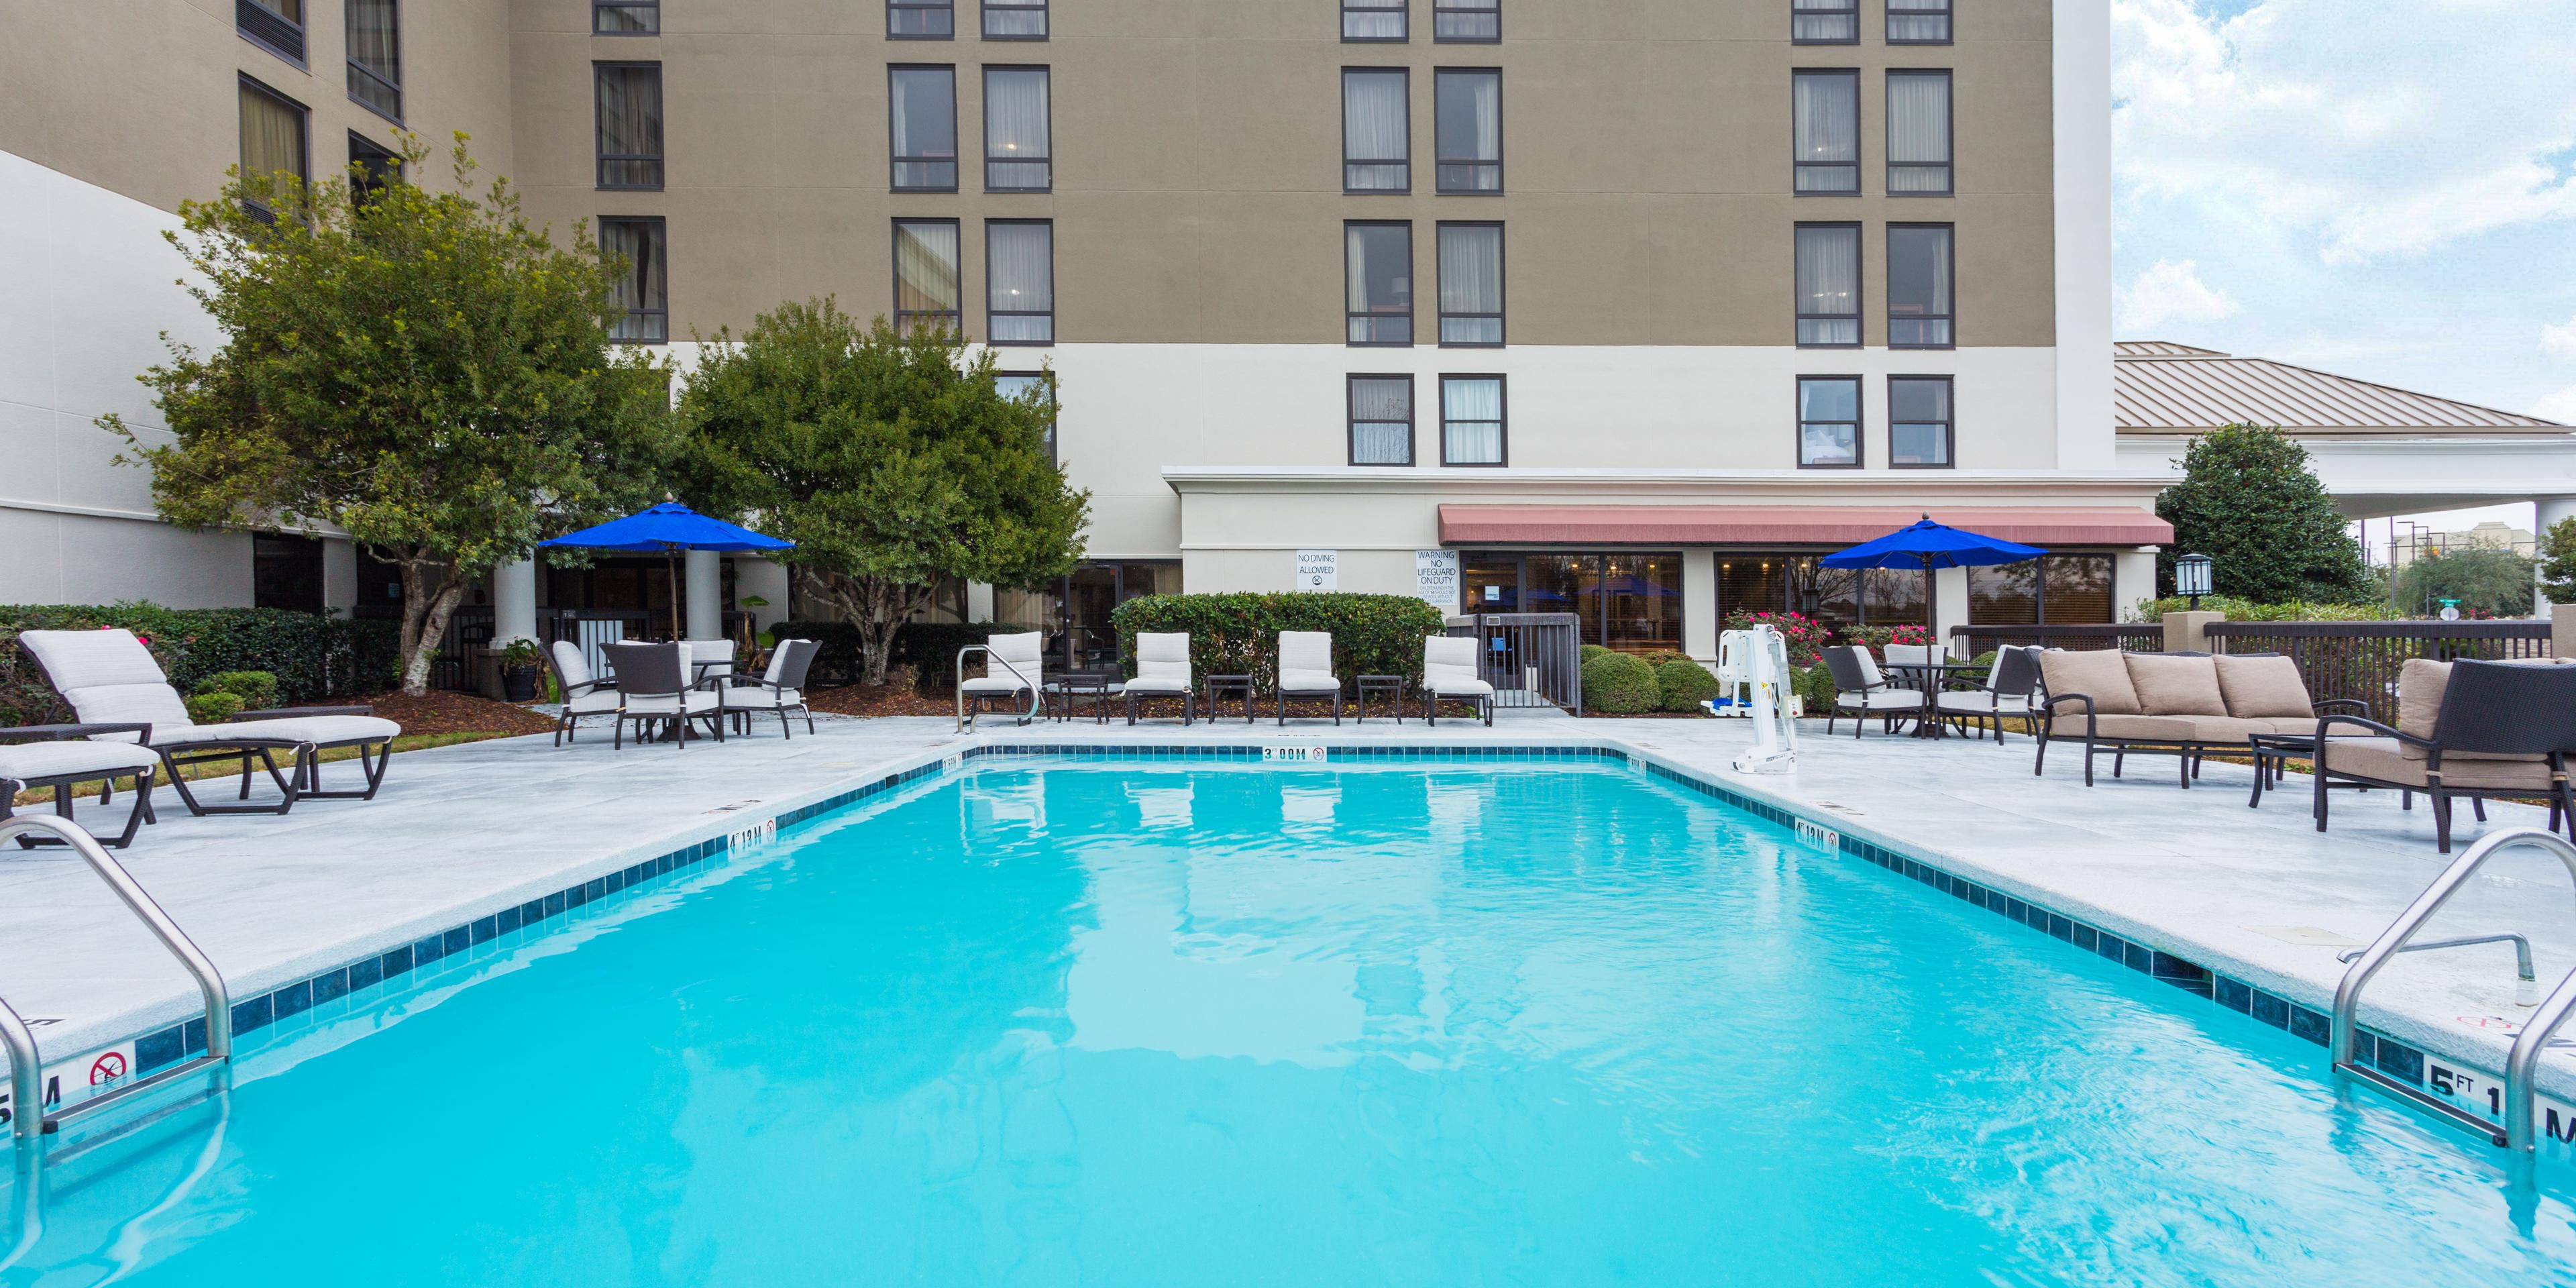 Take a refreshing dip or relax by our outdoor pool, which is open seasonally from 9AM - 10PM.